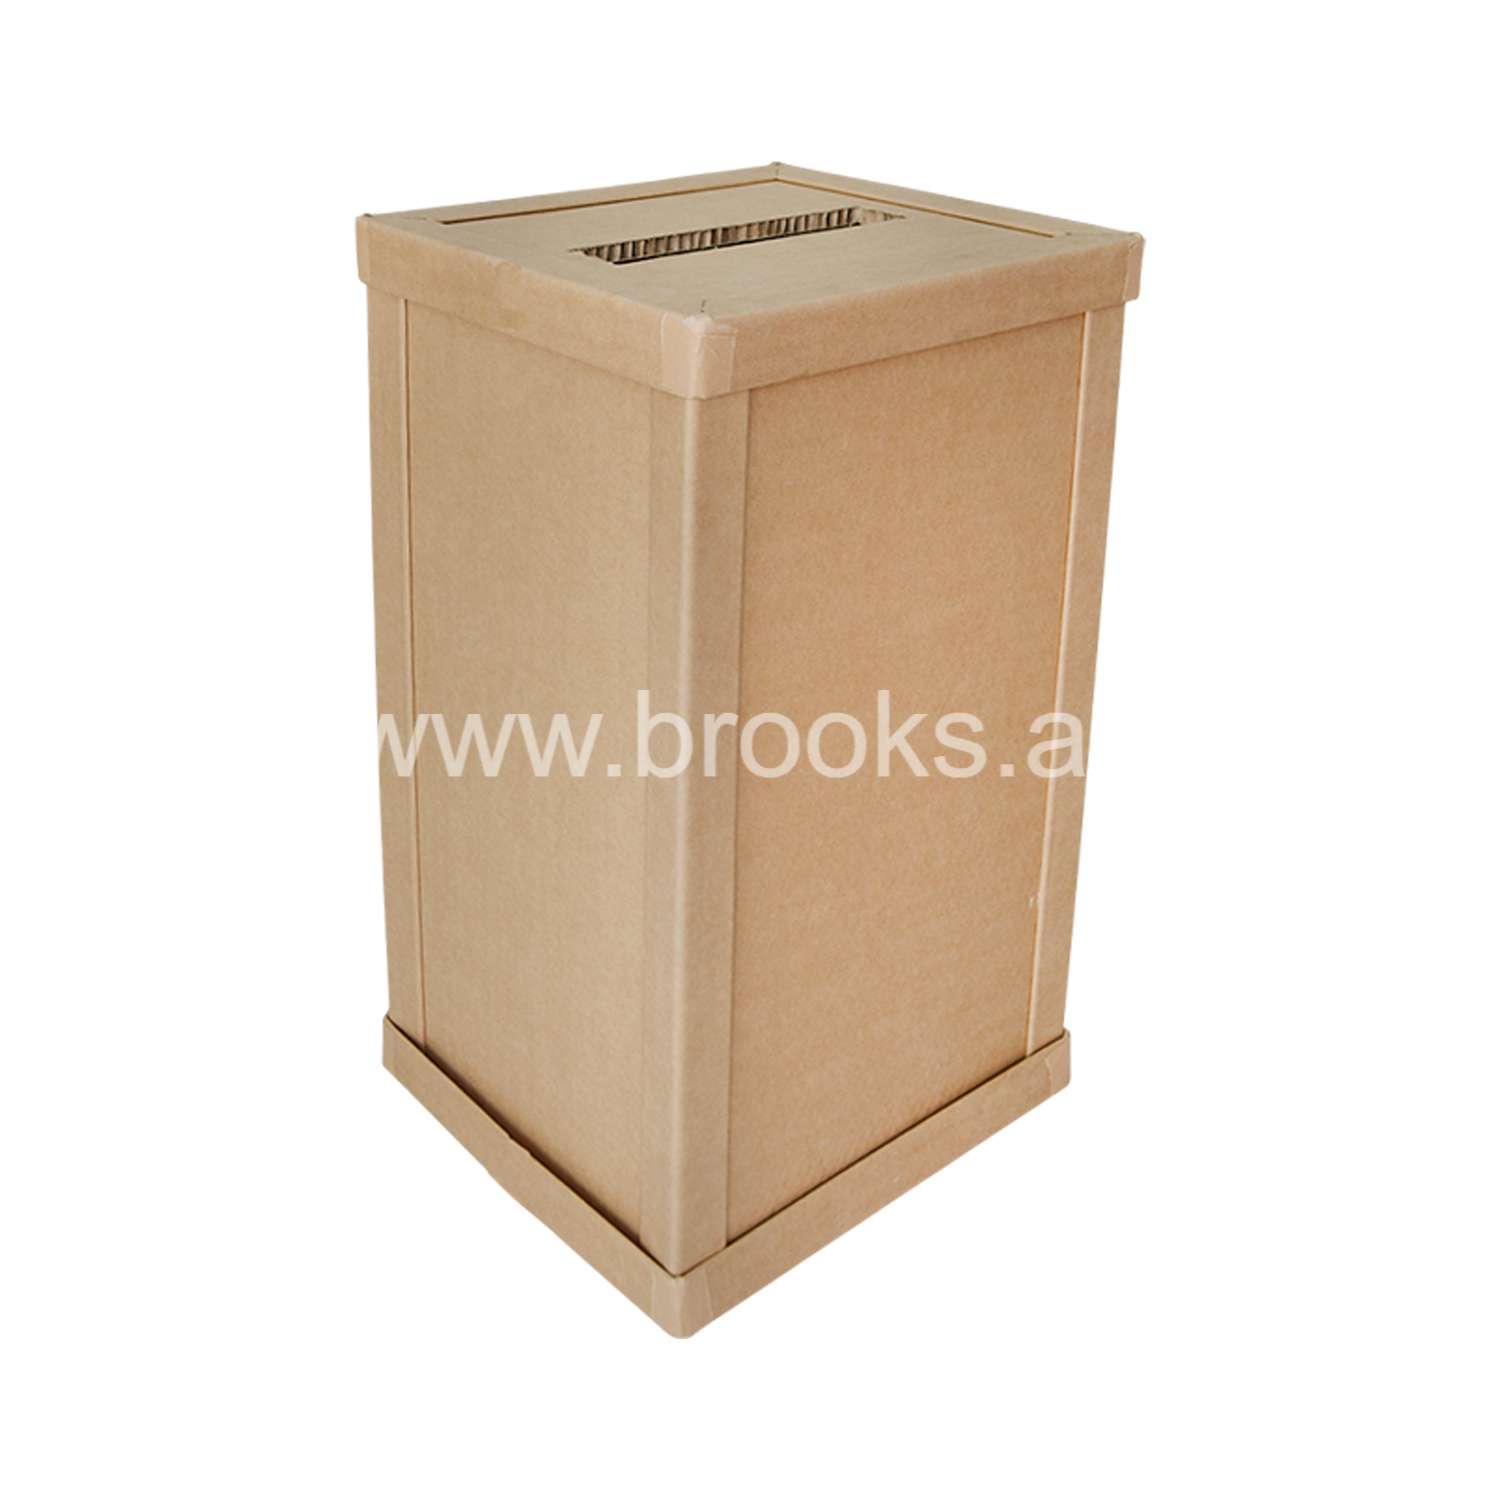 Brooks Corrugated Recycle bin with paper Lid 90Ltr.